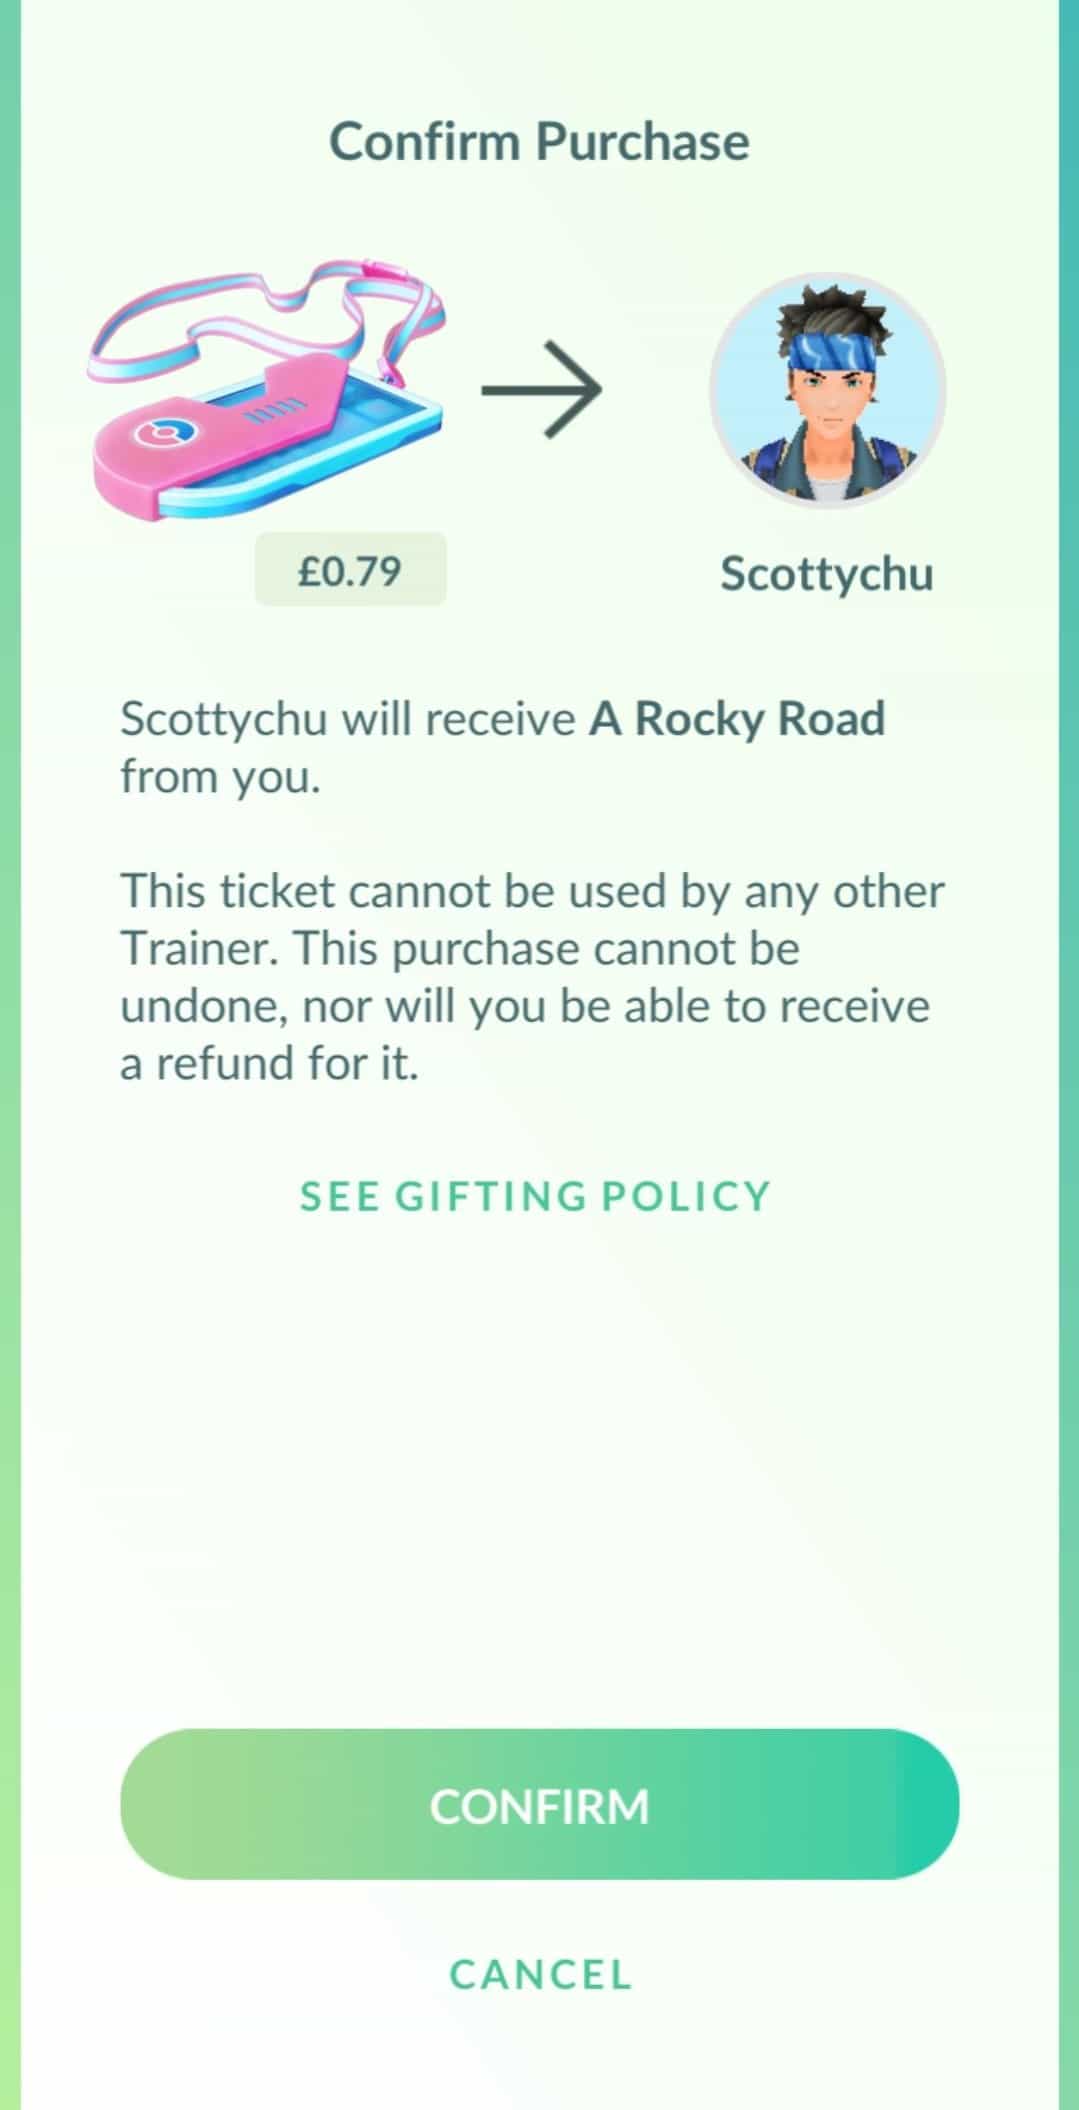 Niantic adds the option to gift Pokémon Go event tickets